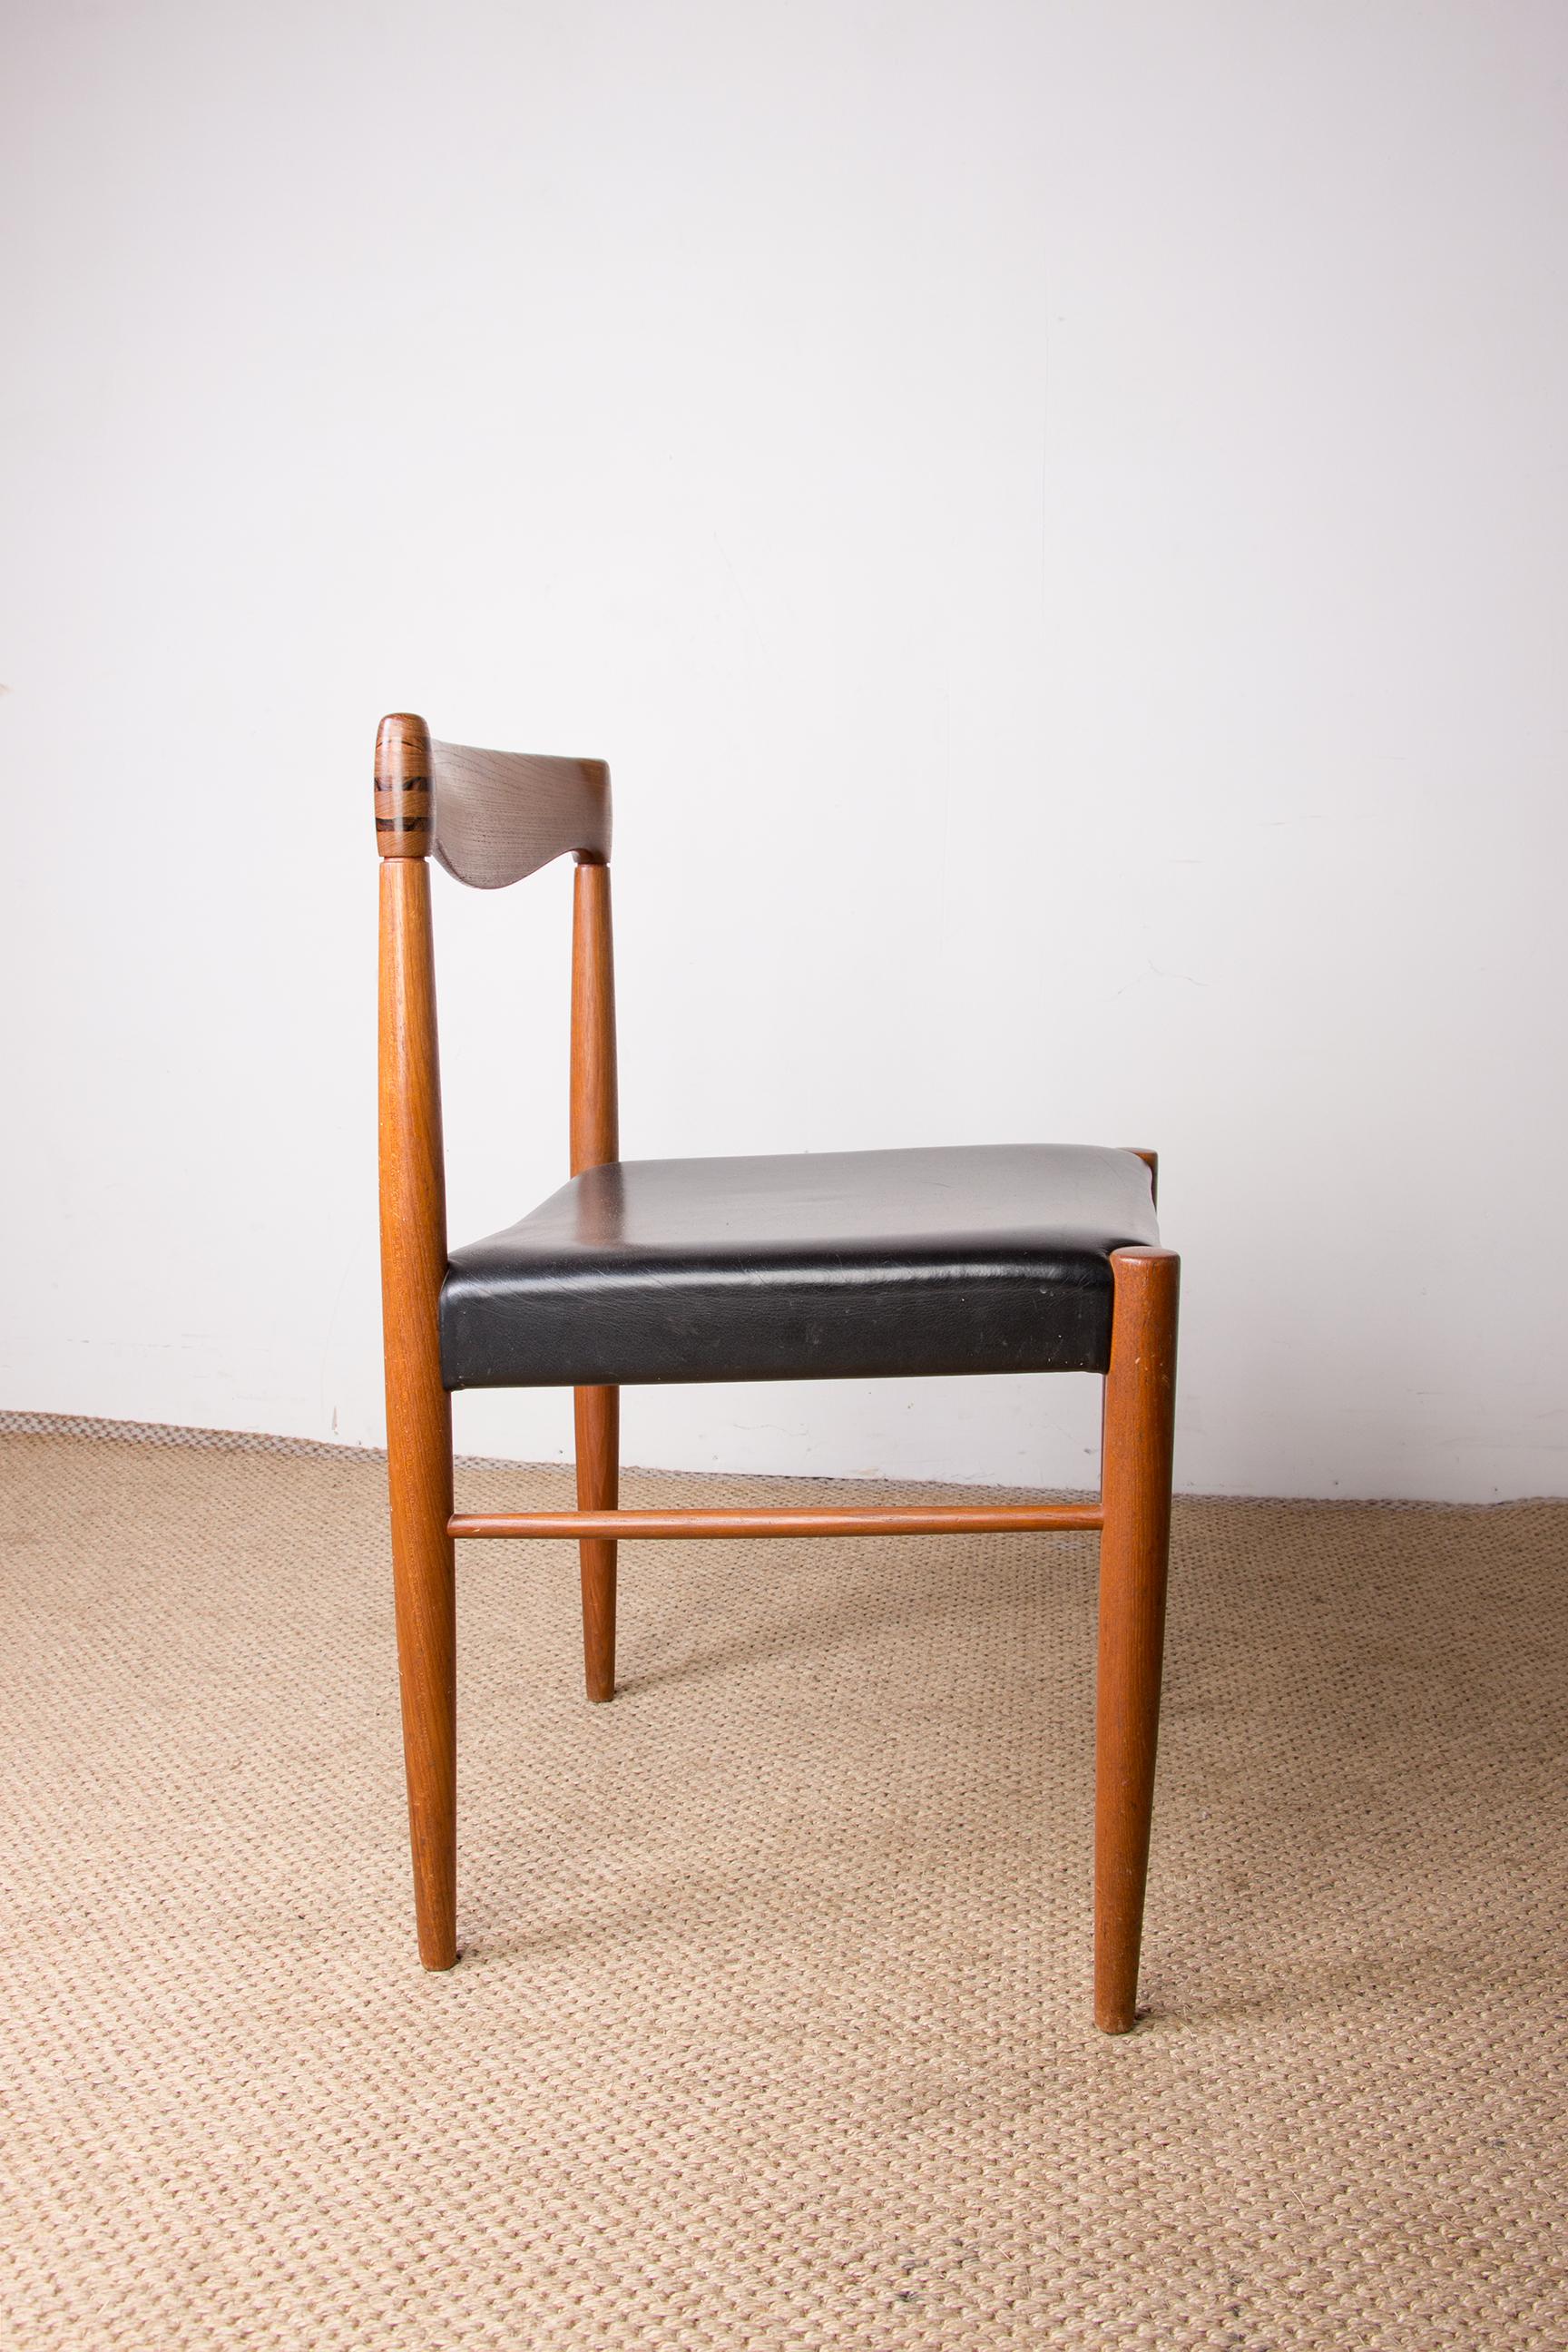 Series of 4 Danish Chairs in Oak and Black Leatherette by Henry Walter Klein for 3